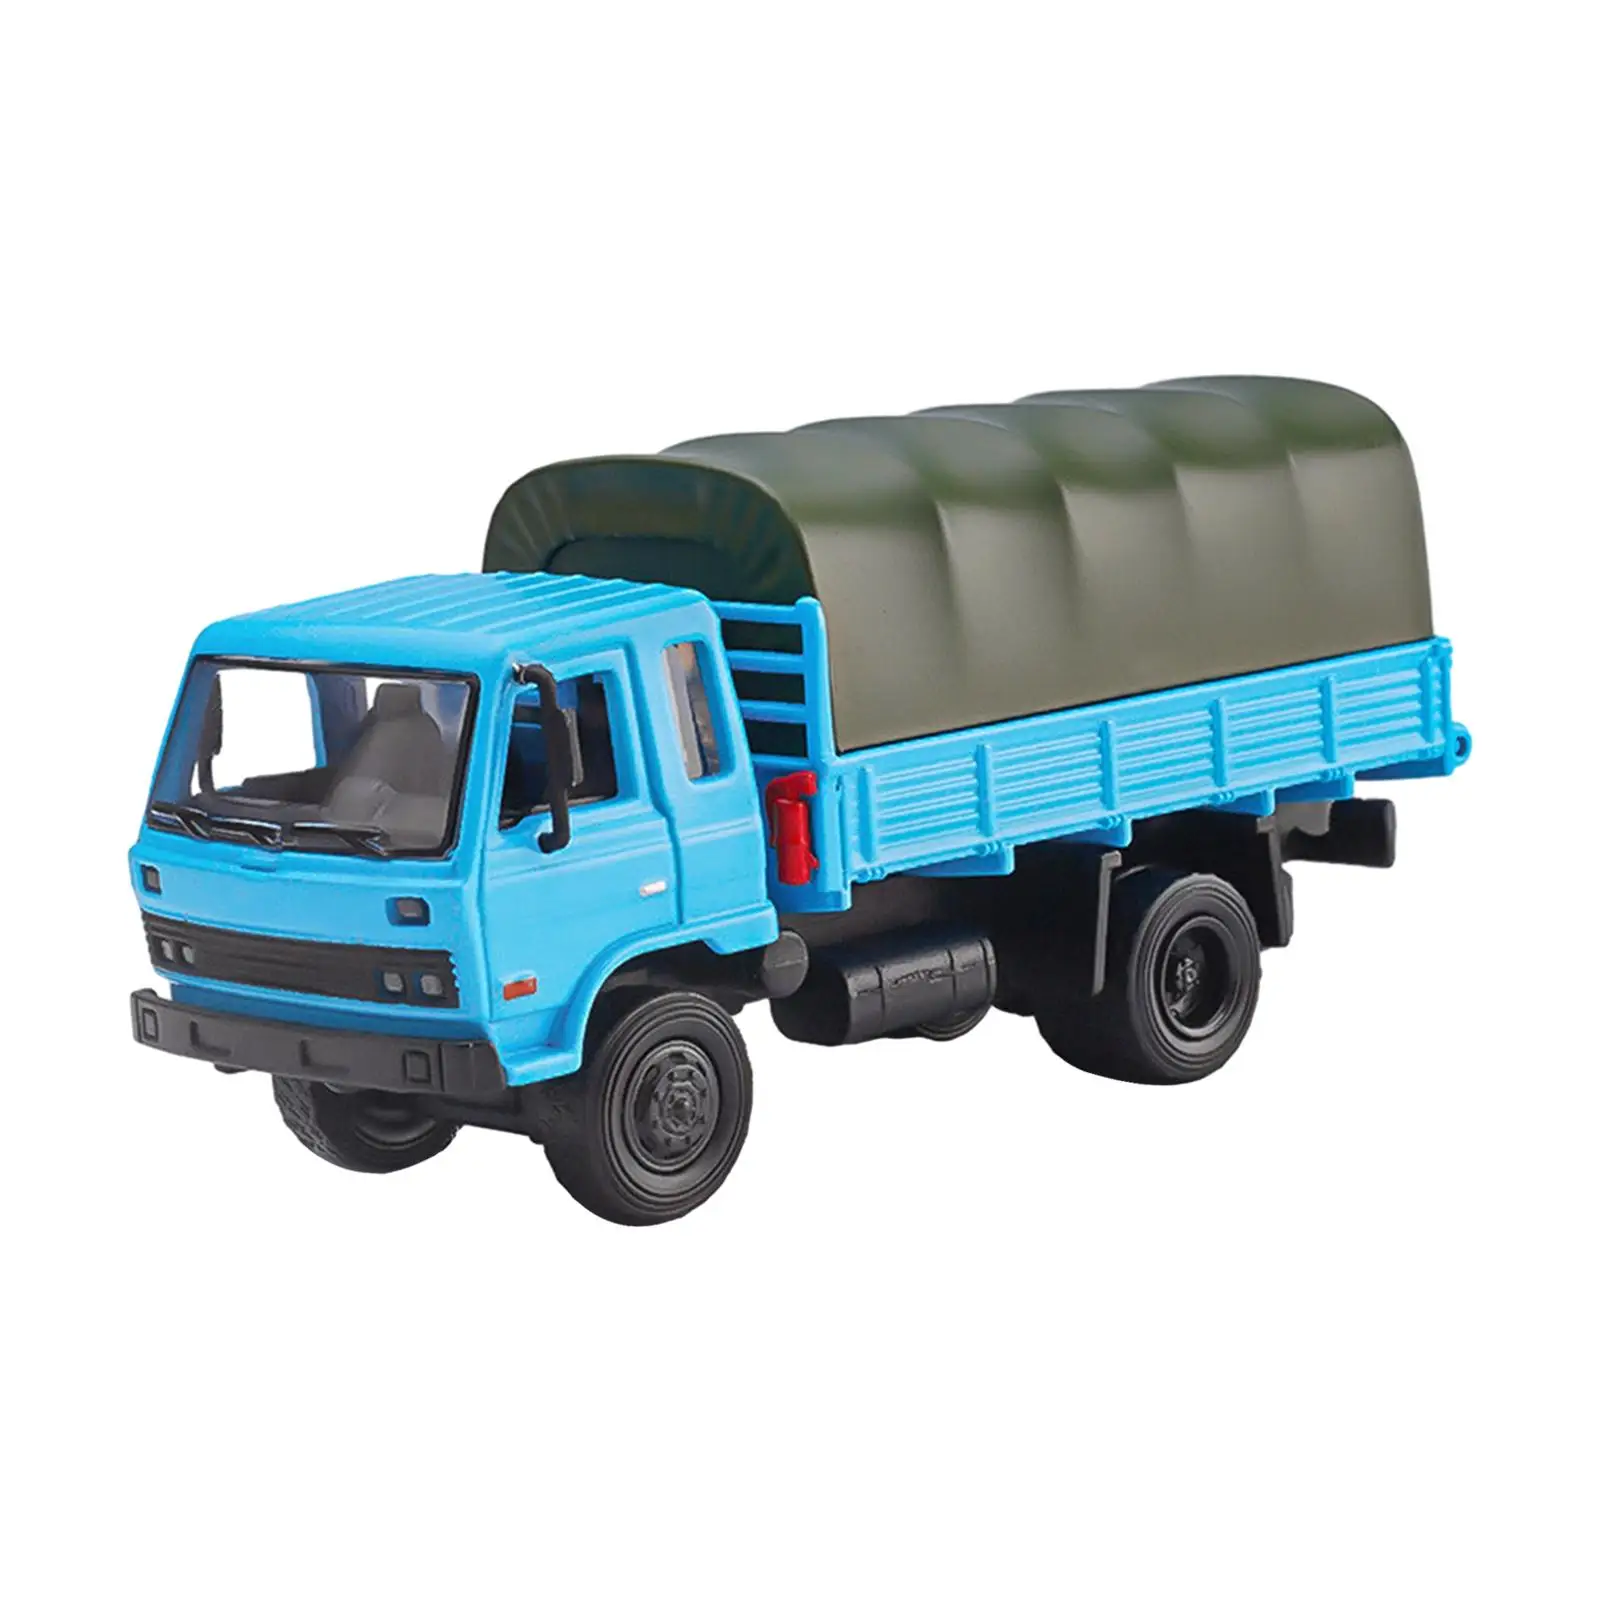 1:64 Transport Truck Mini Carrier Vehicle for Kids Adults Decoration